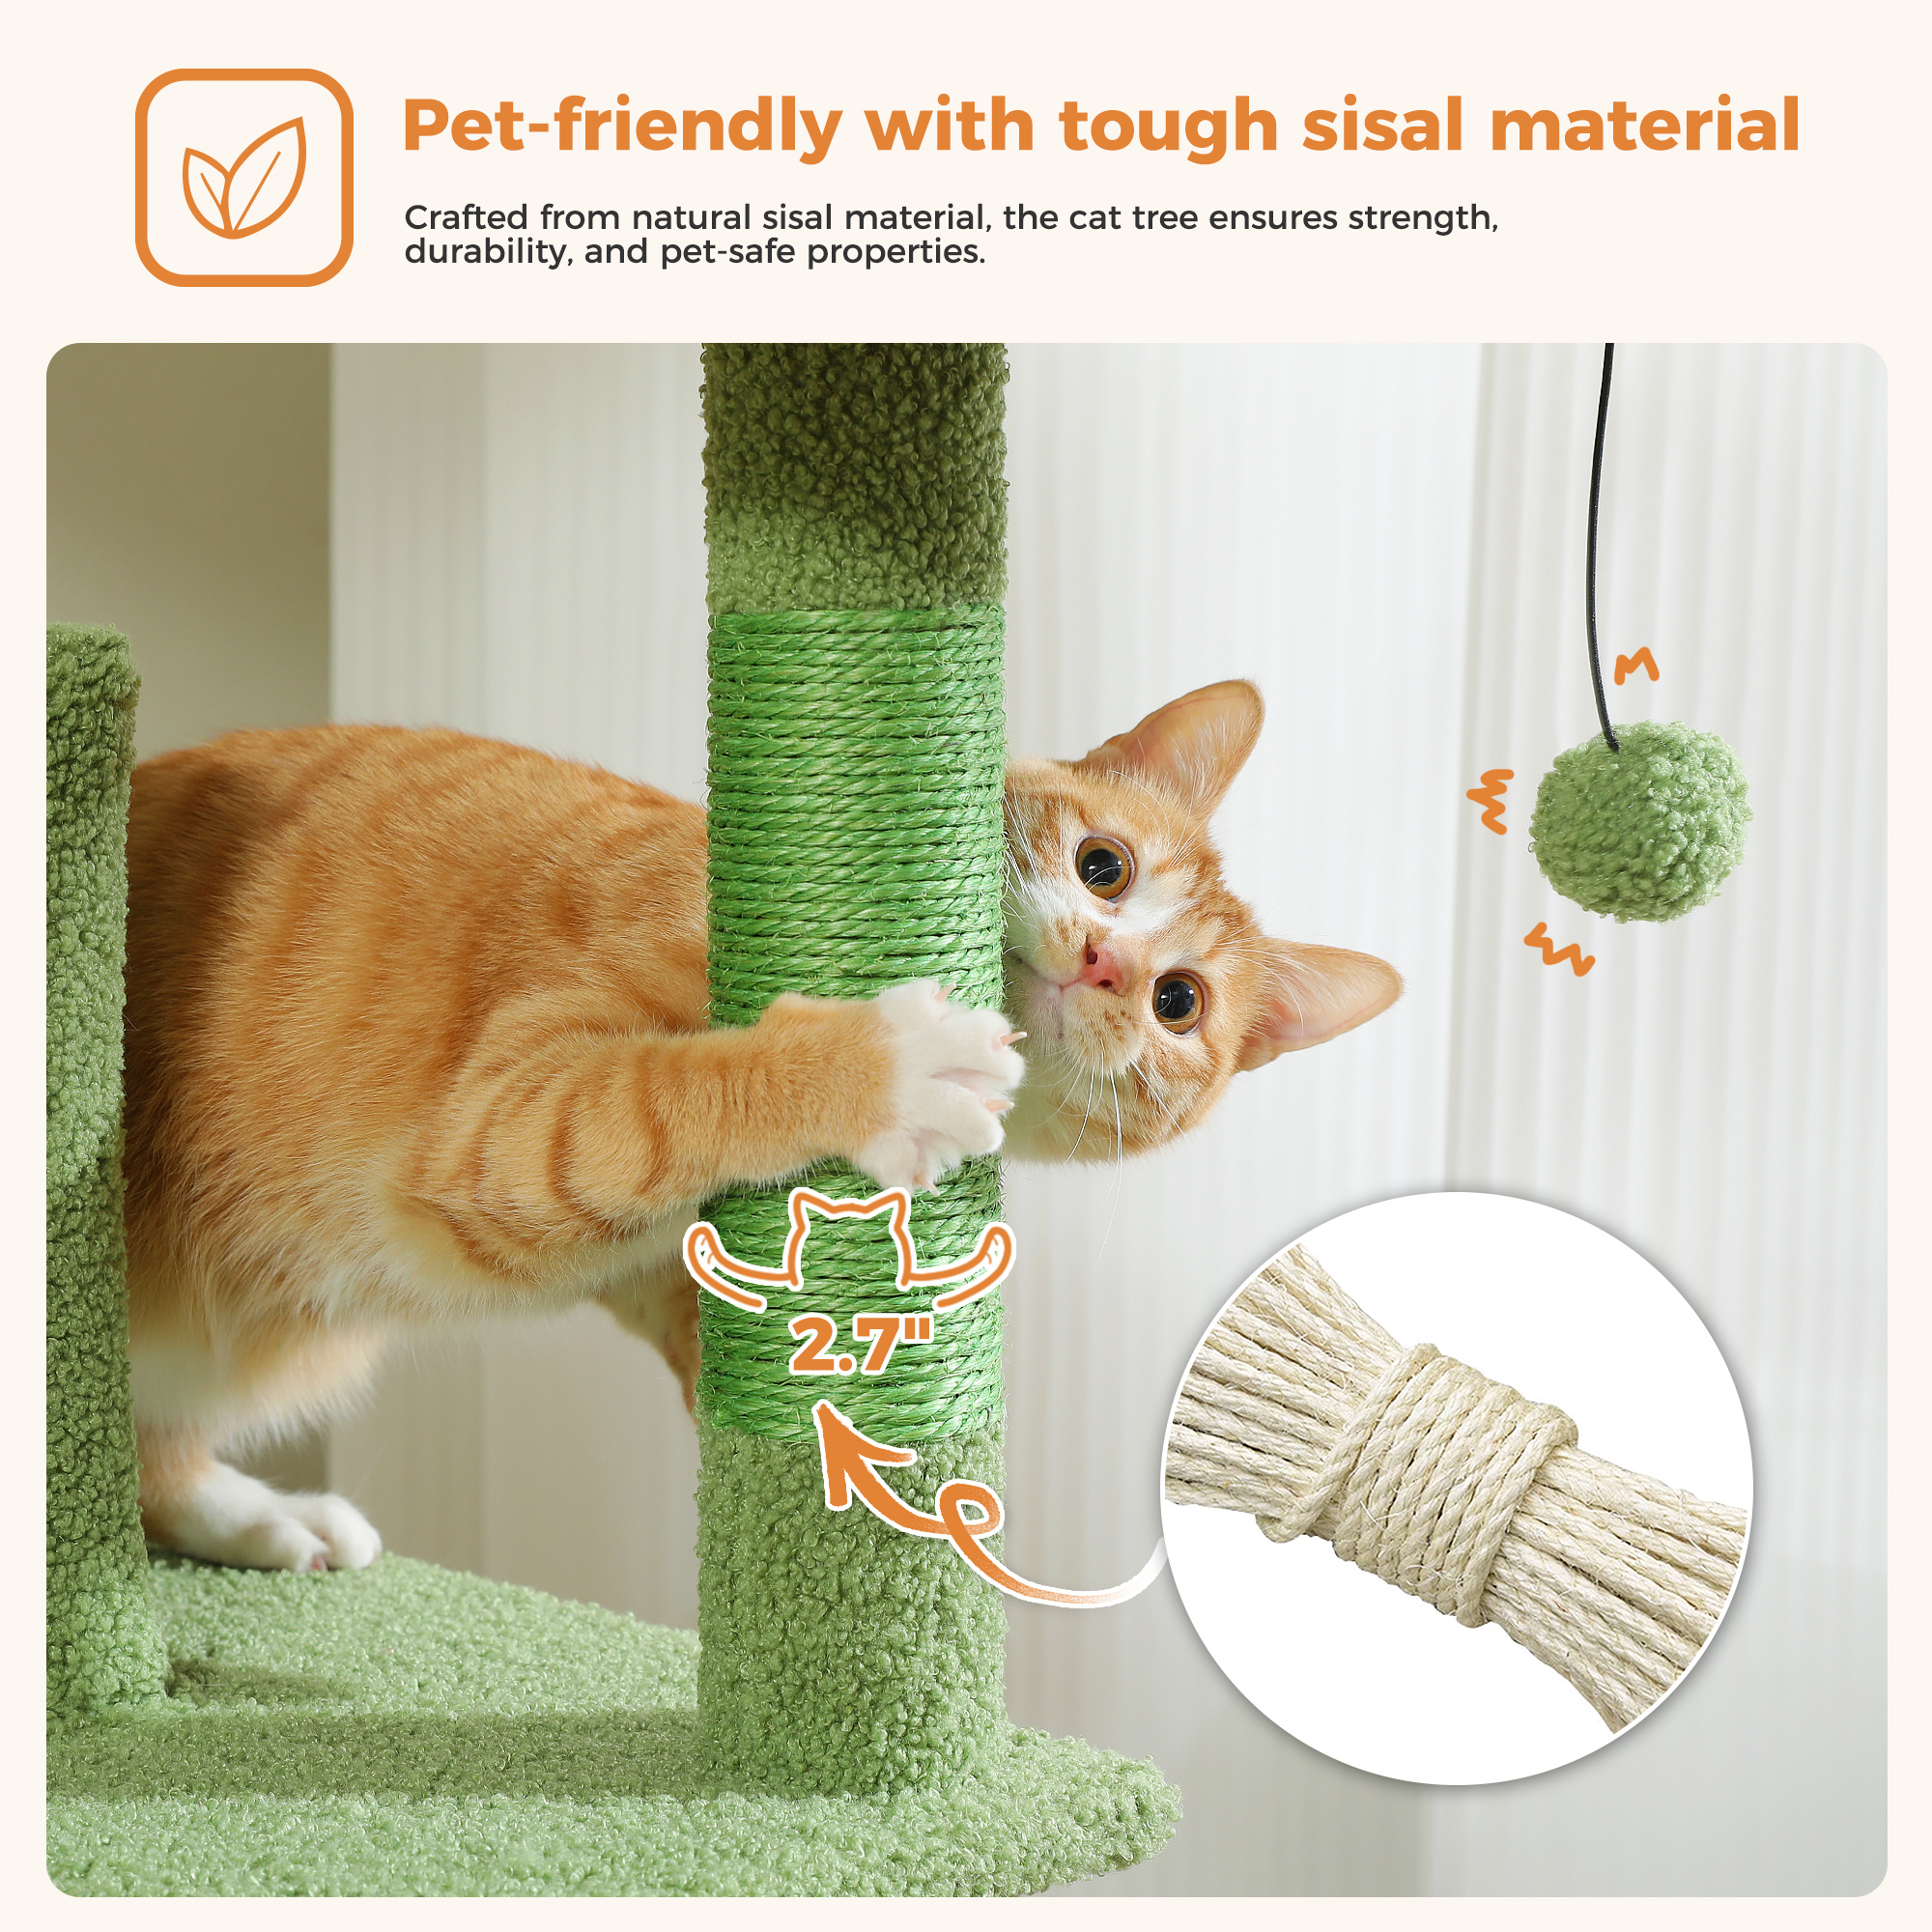 Pefilos 70" Large Cat Tree for Indoor Cats, Multi-Level Cat Tower Cat Scratching Post with 2 Perches, 2 Condos, Hammock and 2 Pompoms, Green